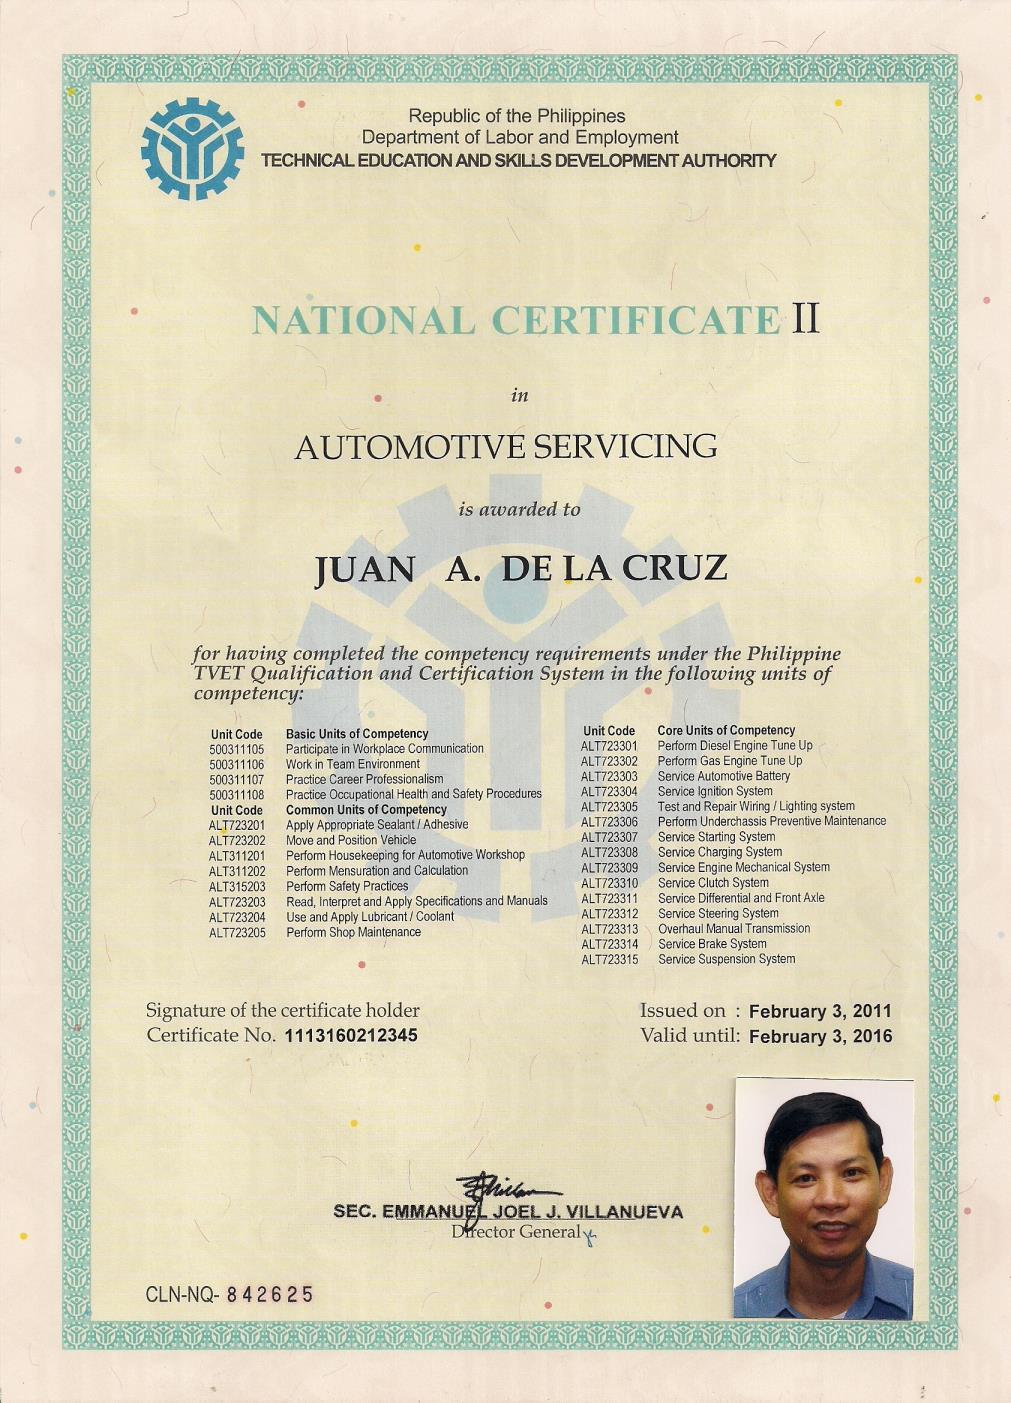 A National Certificate is issued when a candidate has demonstrated